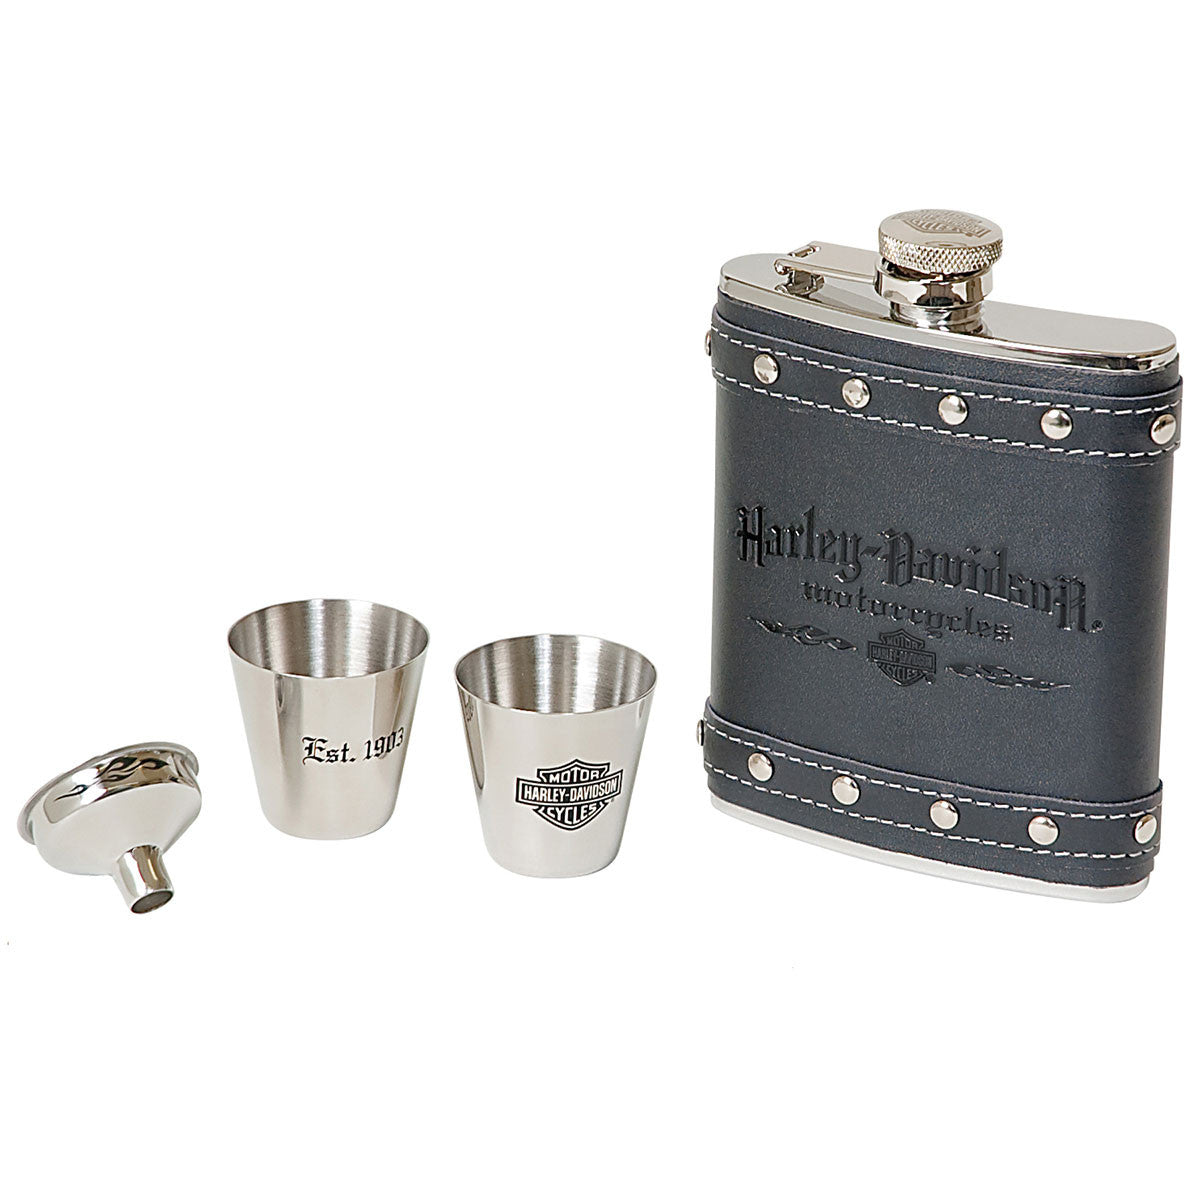 H-D Motorcycle Flask Gift Set